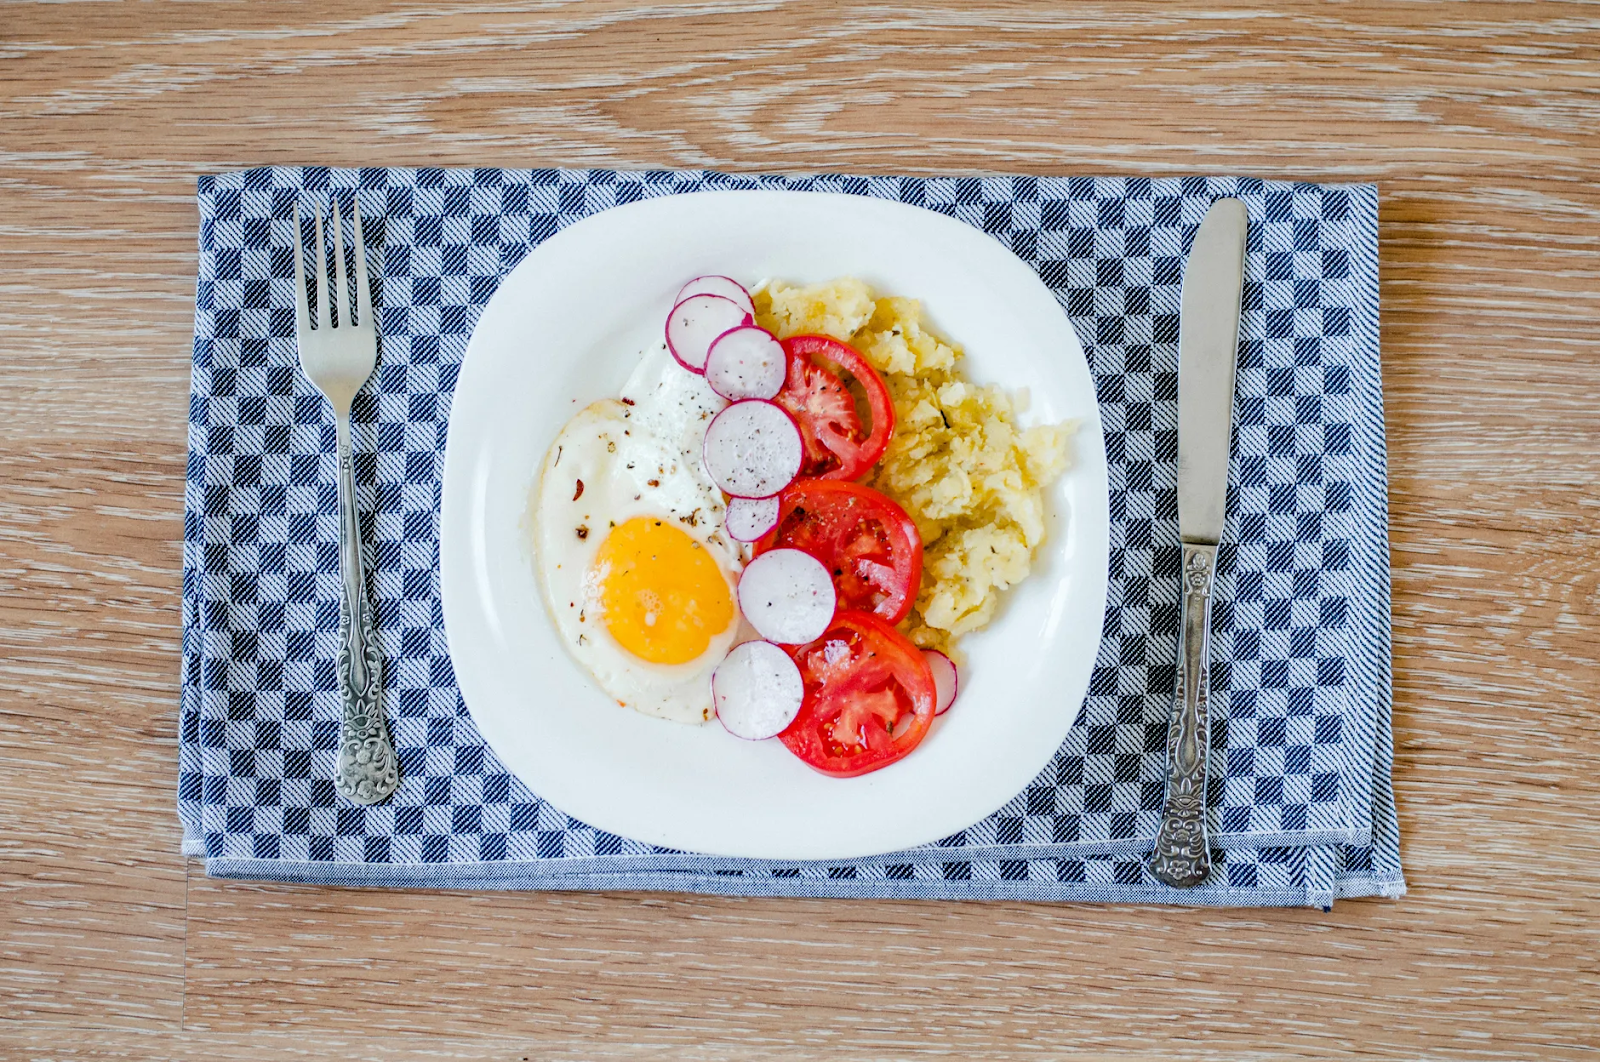 Reasons why Eggs are good for nutrition